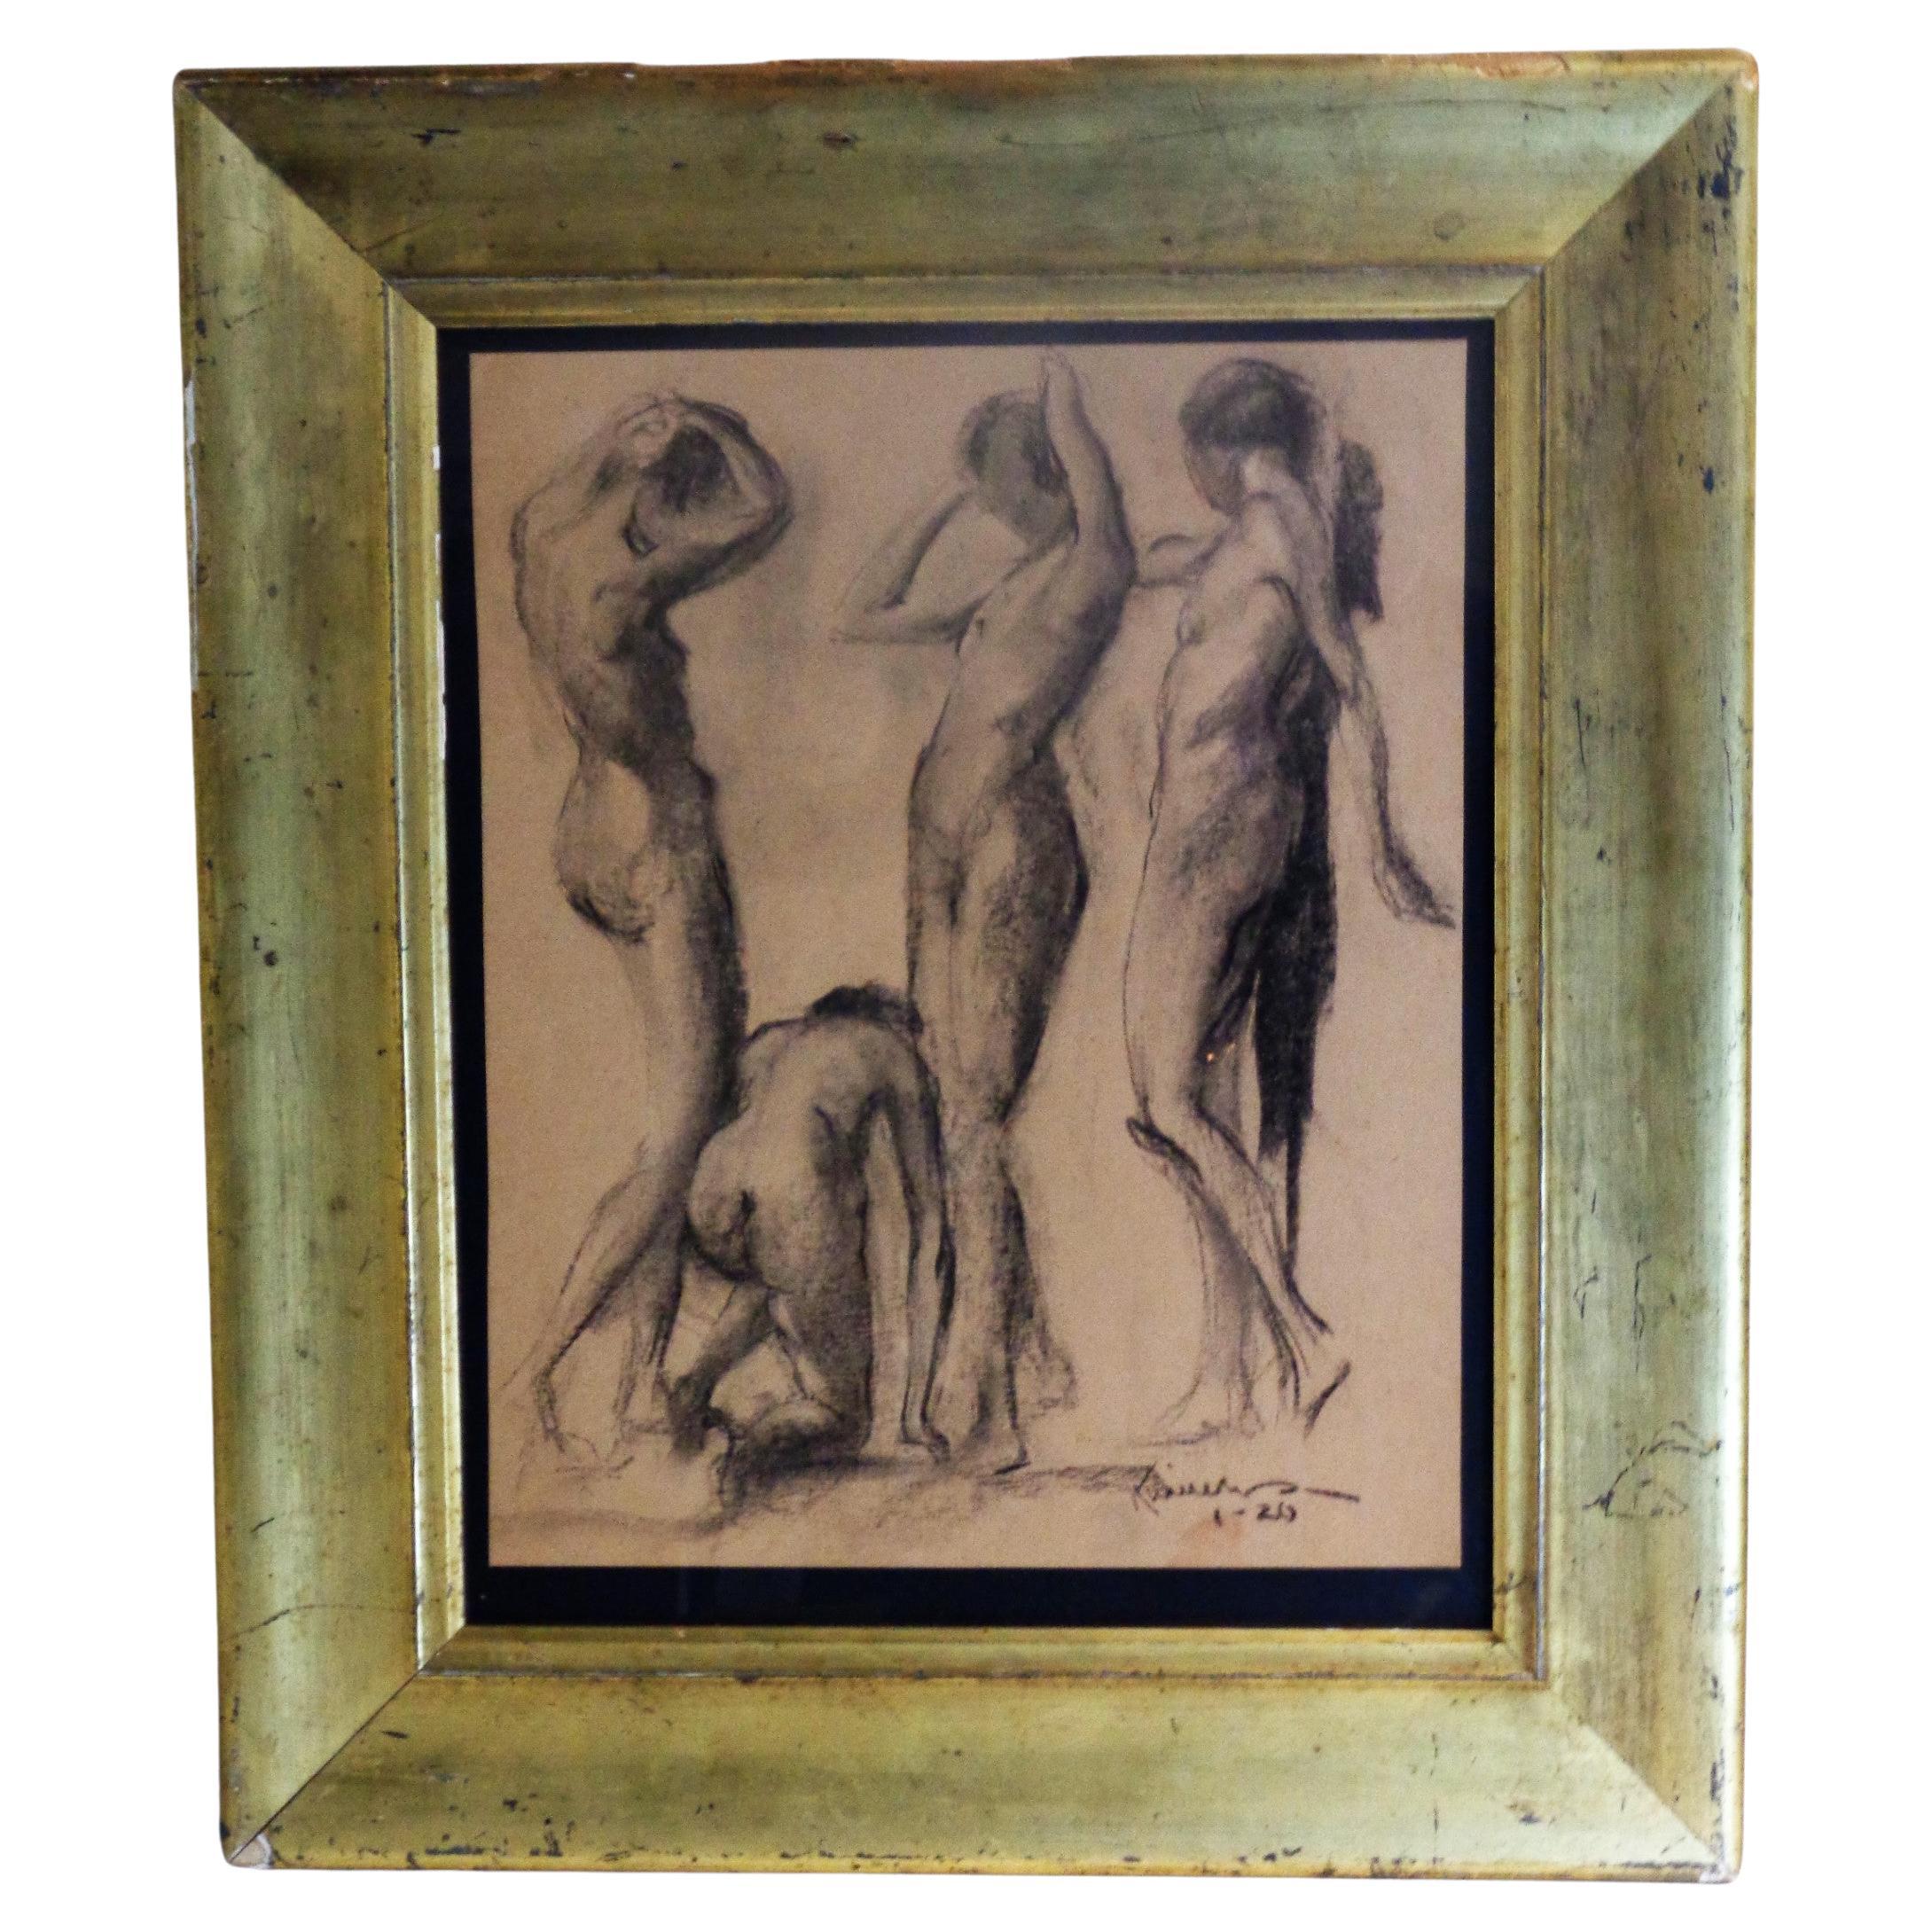  Charcoal and graphite drawing on paper - group study of four female nude figures set in great looking antique wide molding lemon giltwood frame under glass. Artist signed lower left corner ( see image 3 - cannot fully make out name ) dated 1 -29.